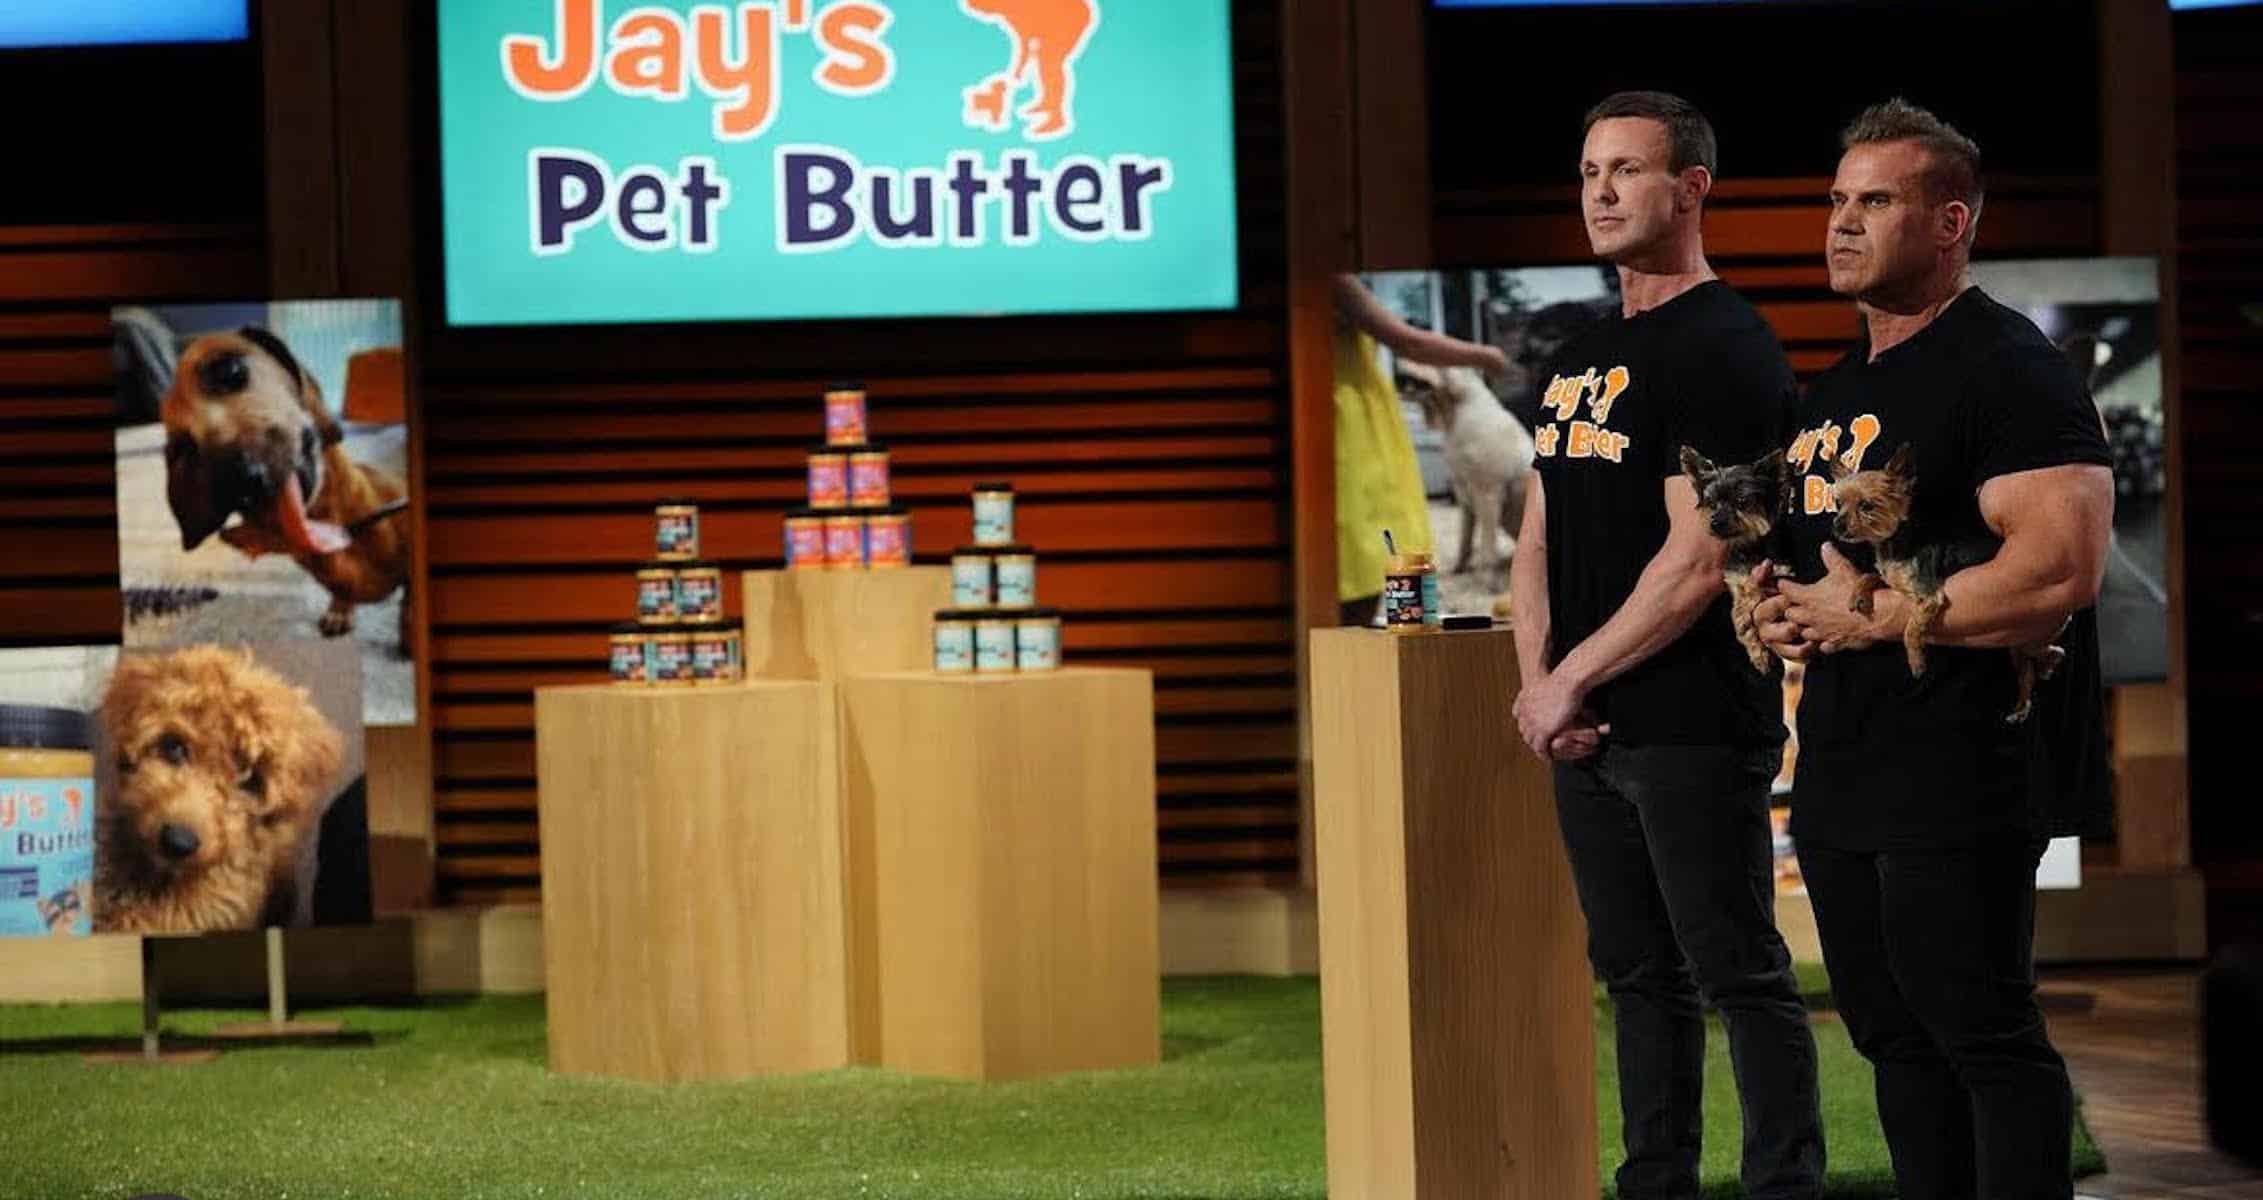 Jay Cutler To Appear On This Week's Shark Tank Pitching Jay's Pet Butter